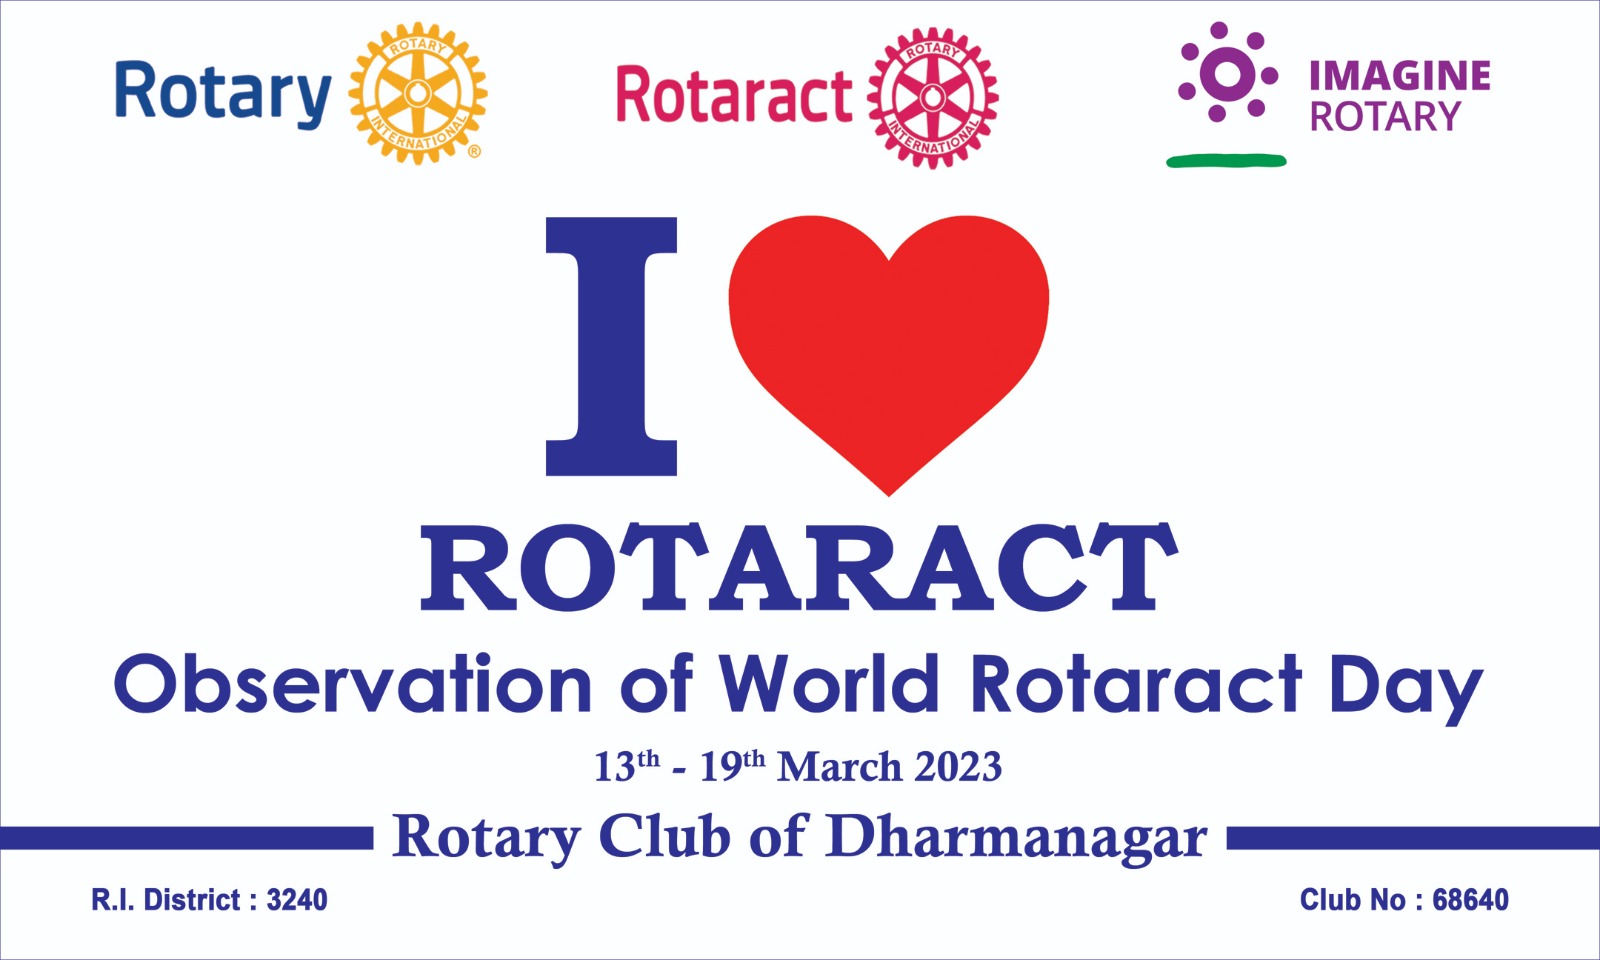 OBSERVED ROTARACT DAY